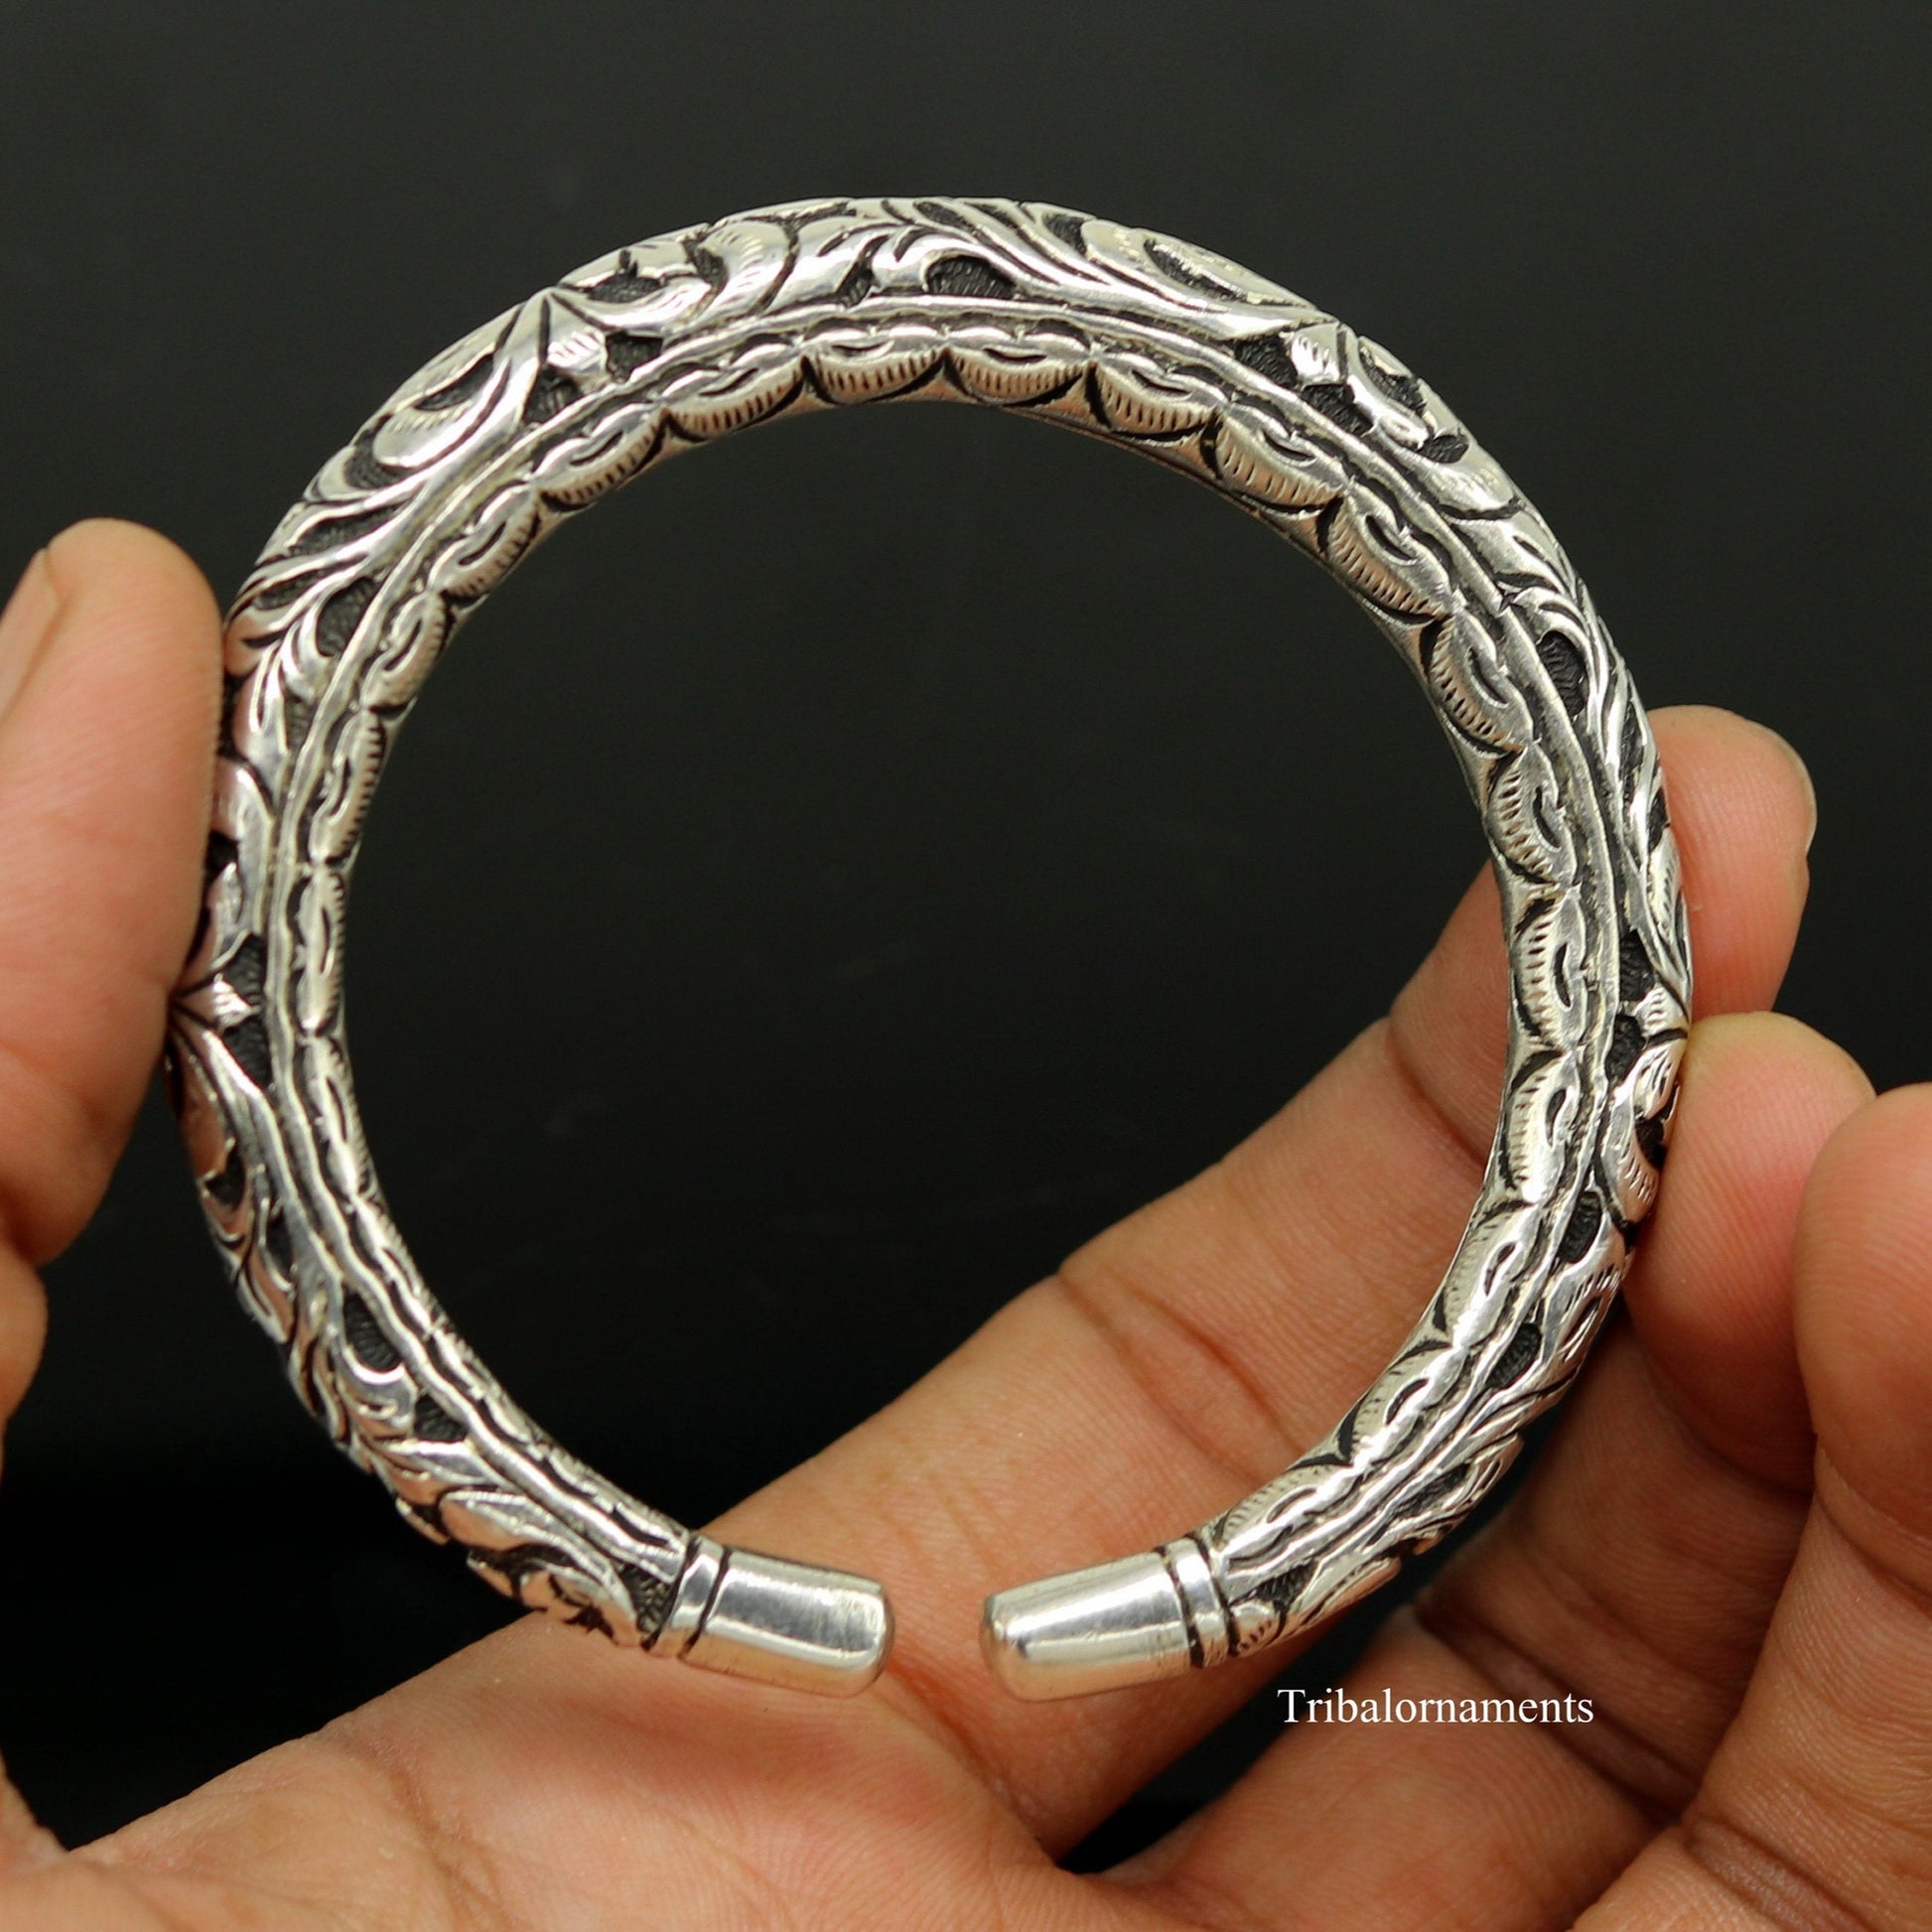 925 Sterling silver handcrafted chitai work customized oxidized stylish vintage design excellent bangle bracelet kada tribal jewelry nsk275 - TRIBAL ORNAMENTS